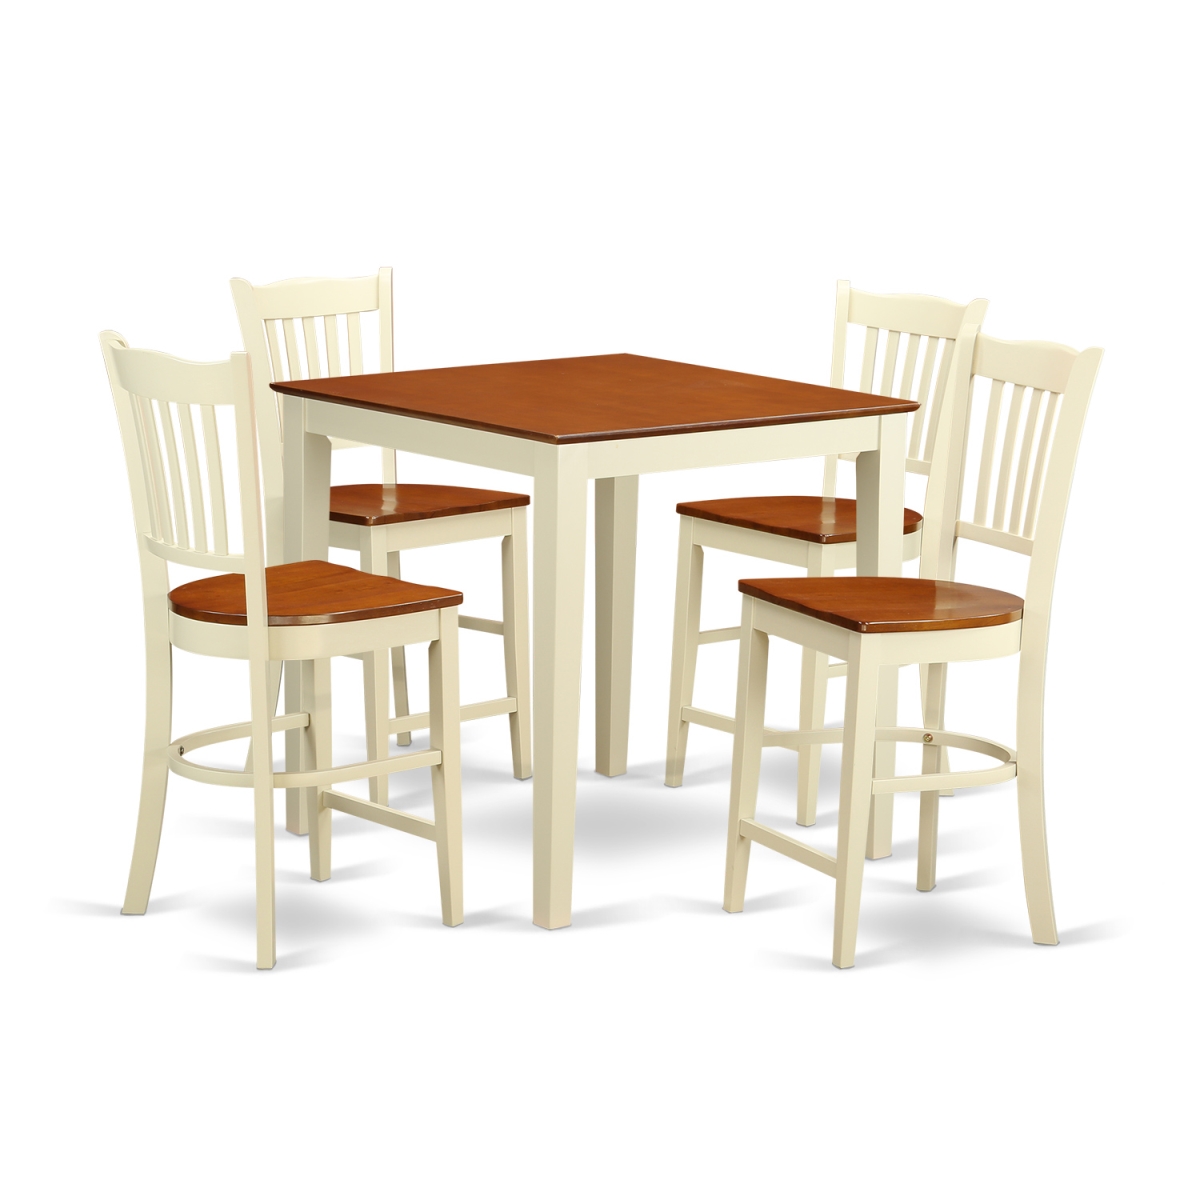 Counter Height Pub Table & 4 Chairs, White Finish